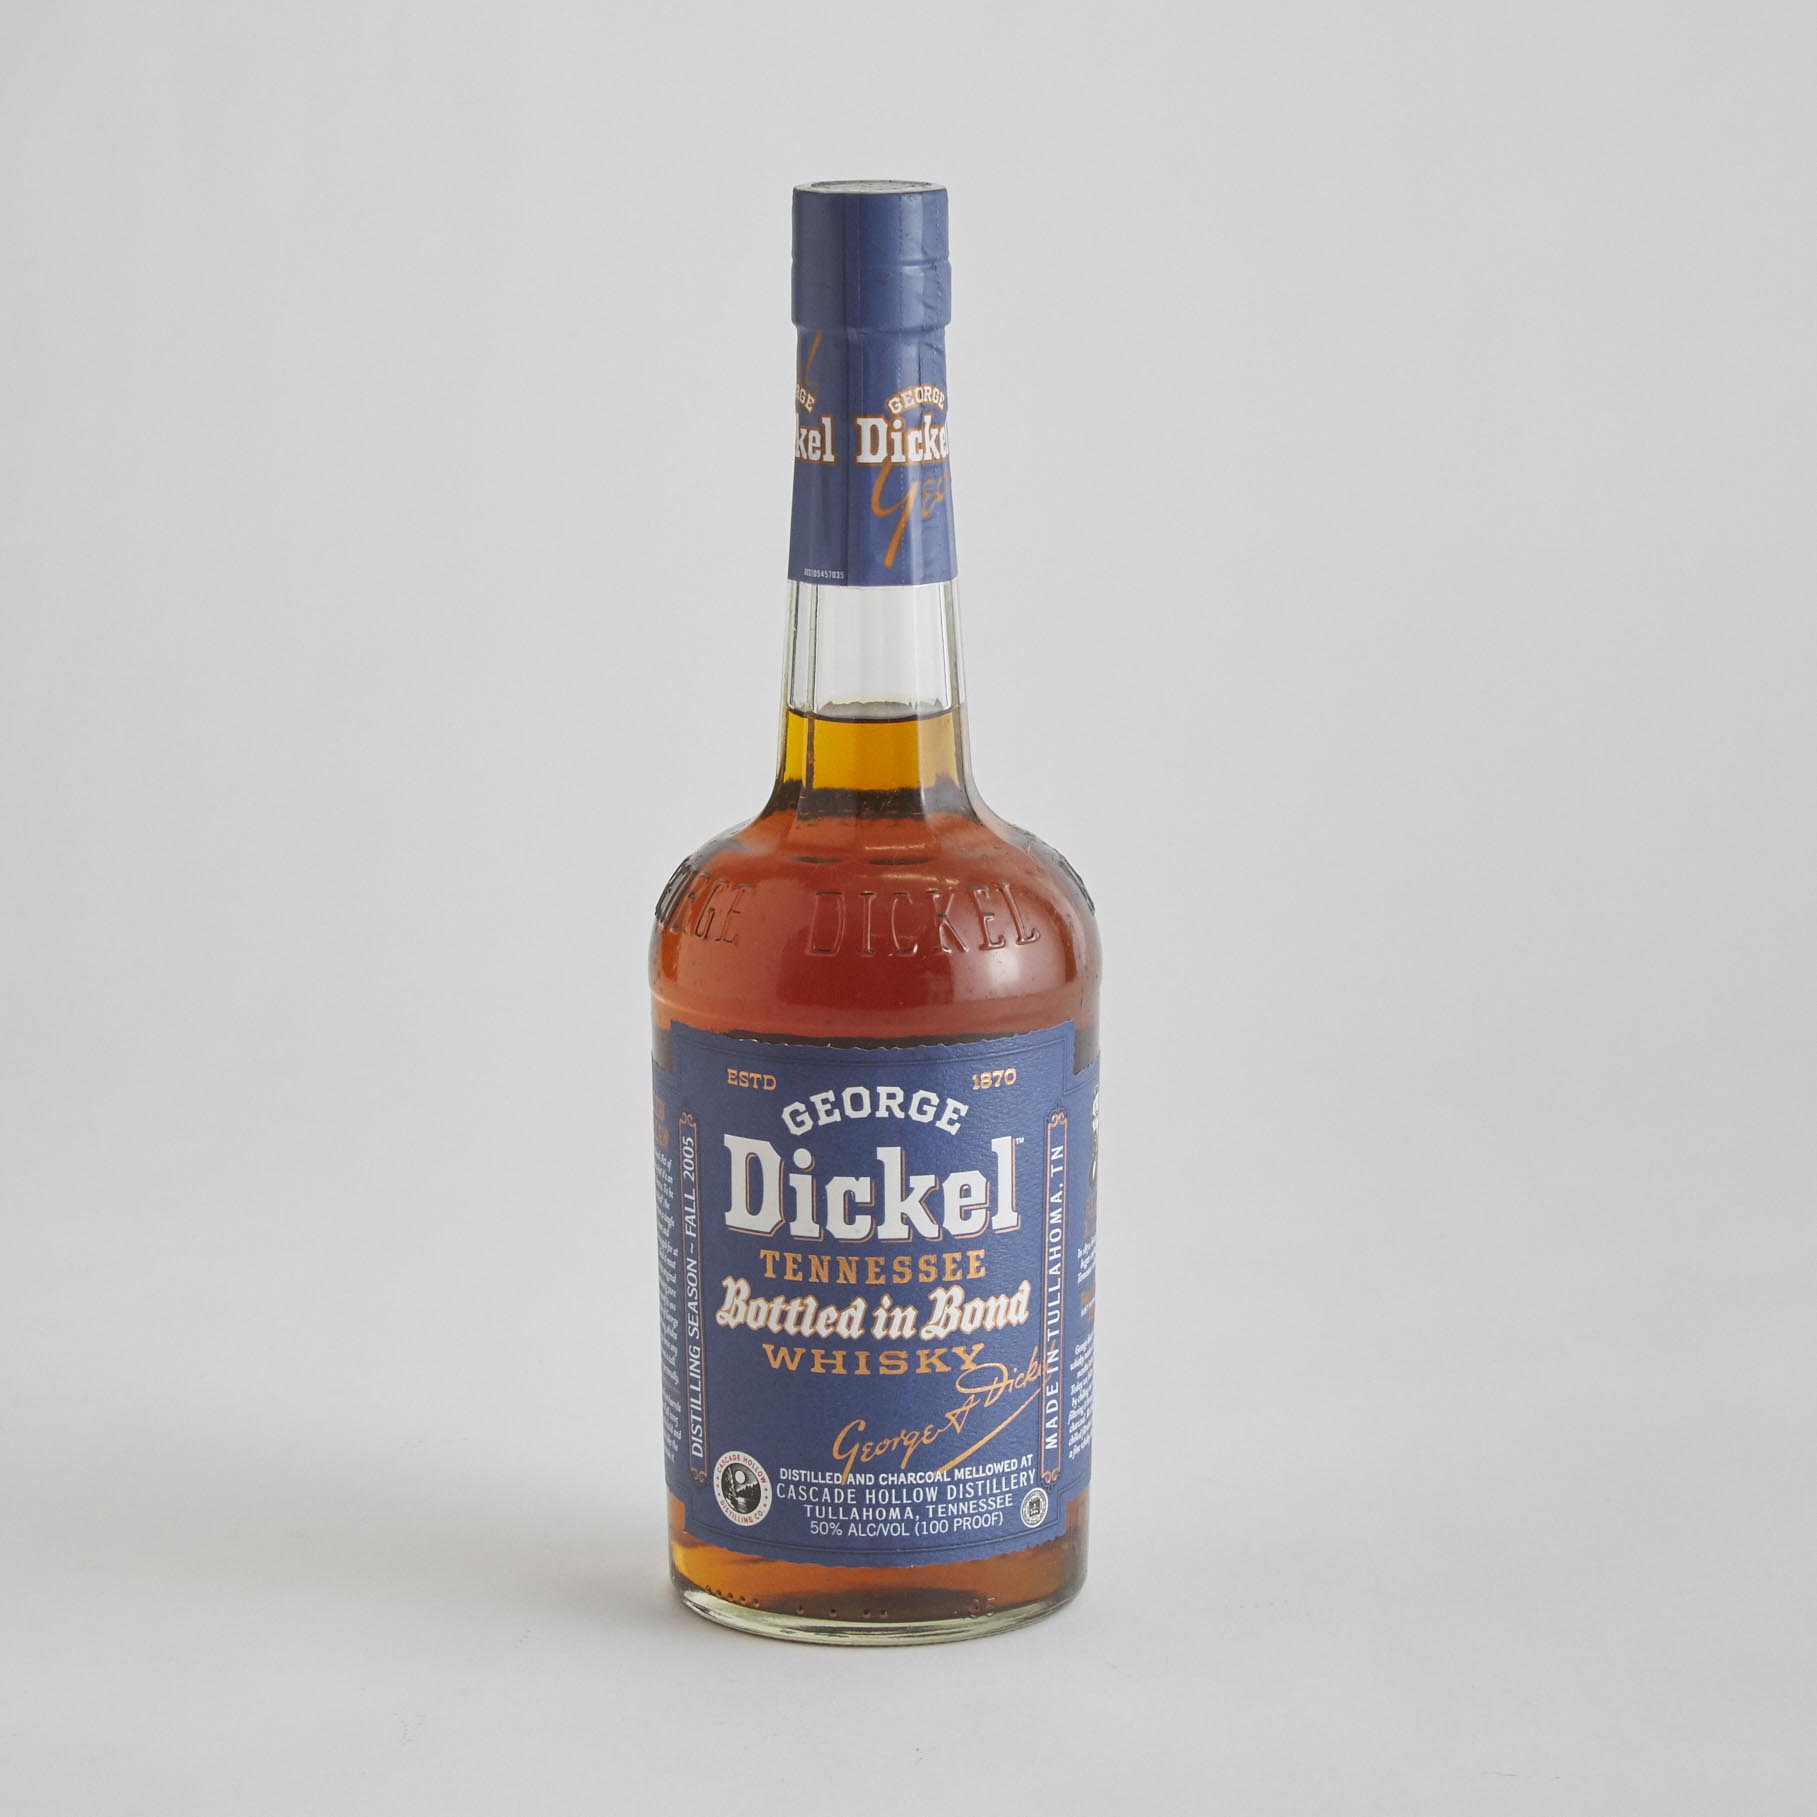 GEORGE DICKEL BOTTLED IN BOND TENNESSEE WHISKY (ONE 750 ML)